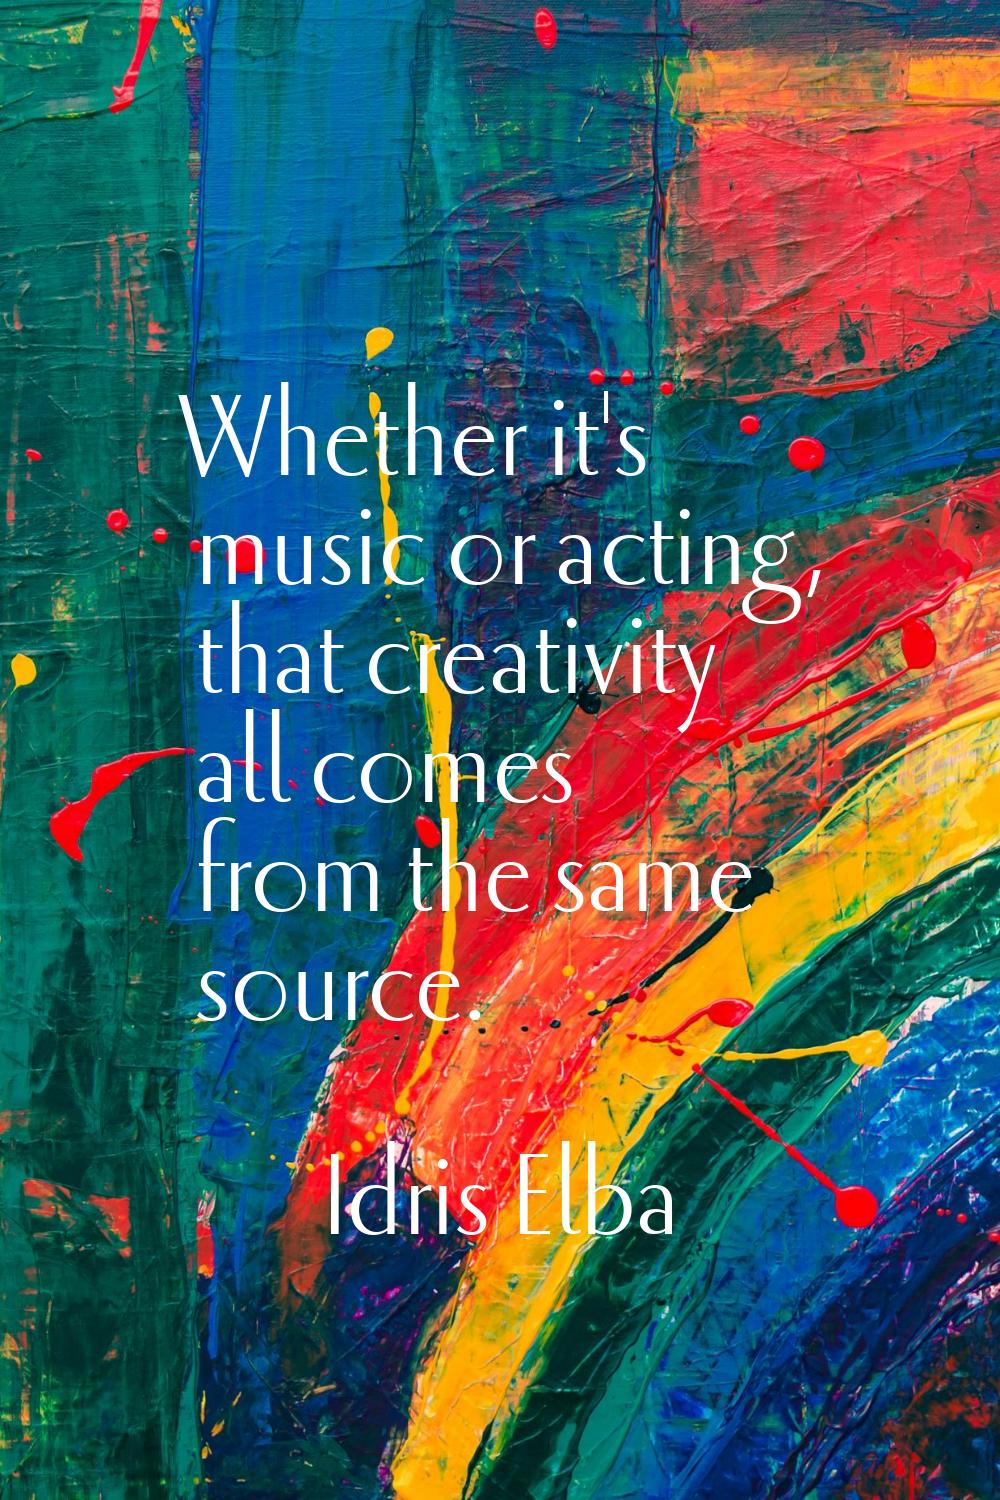 Whether it's music or acting, that creativity all comes from the same source.